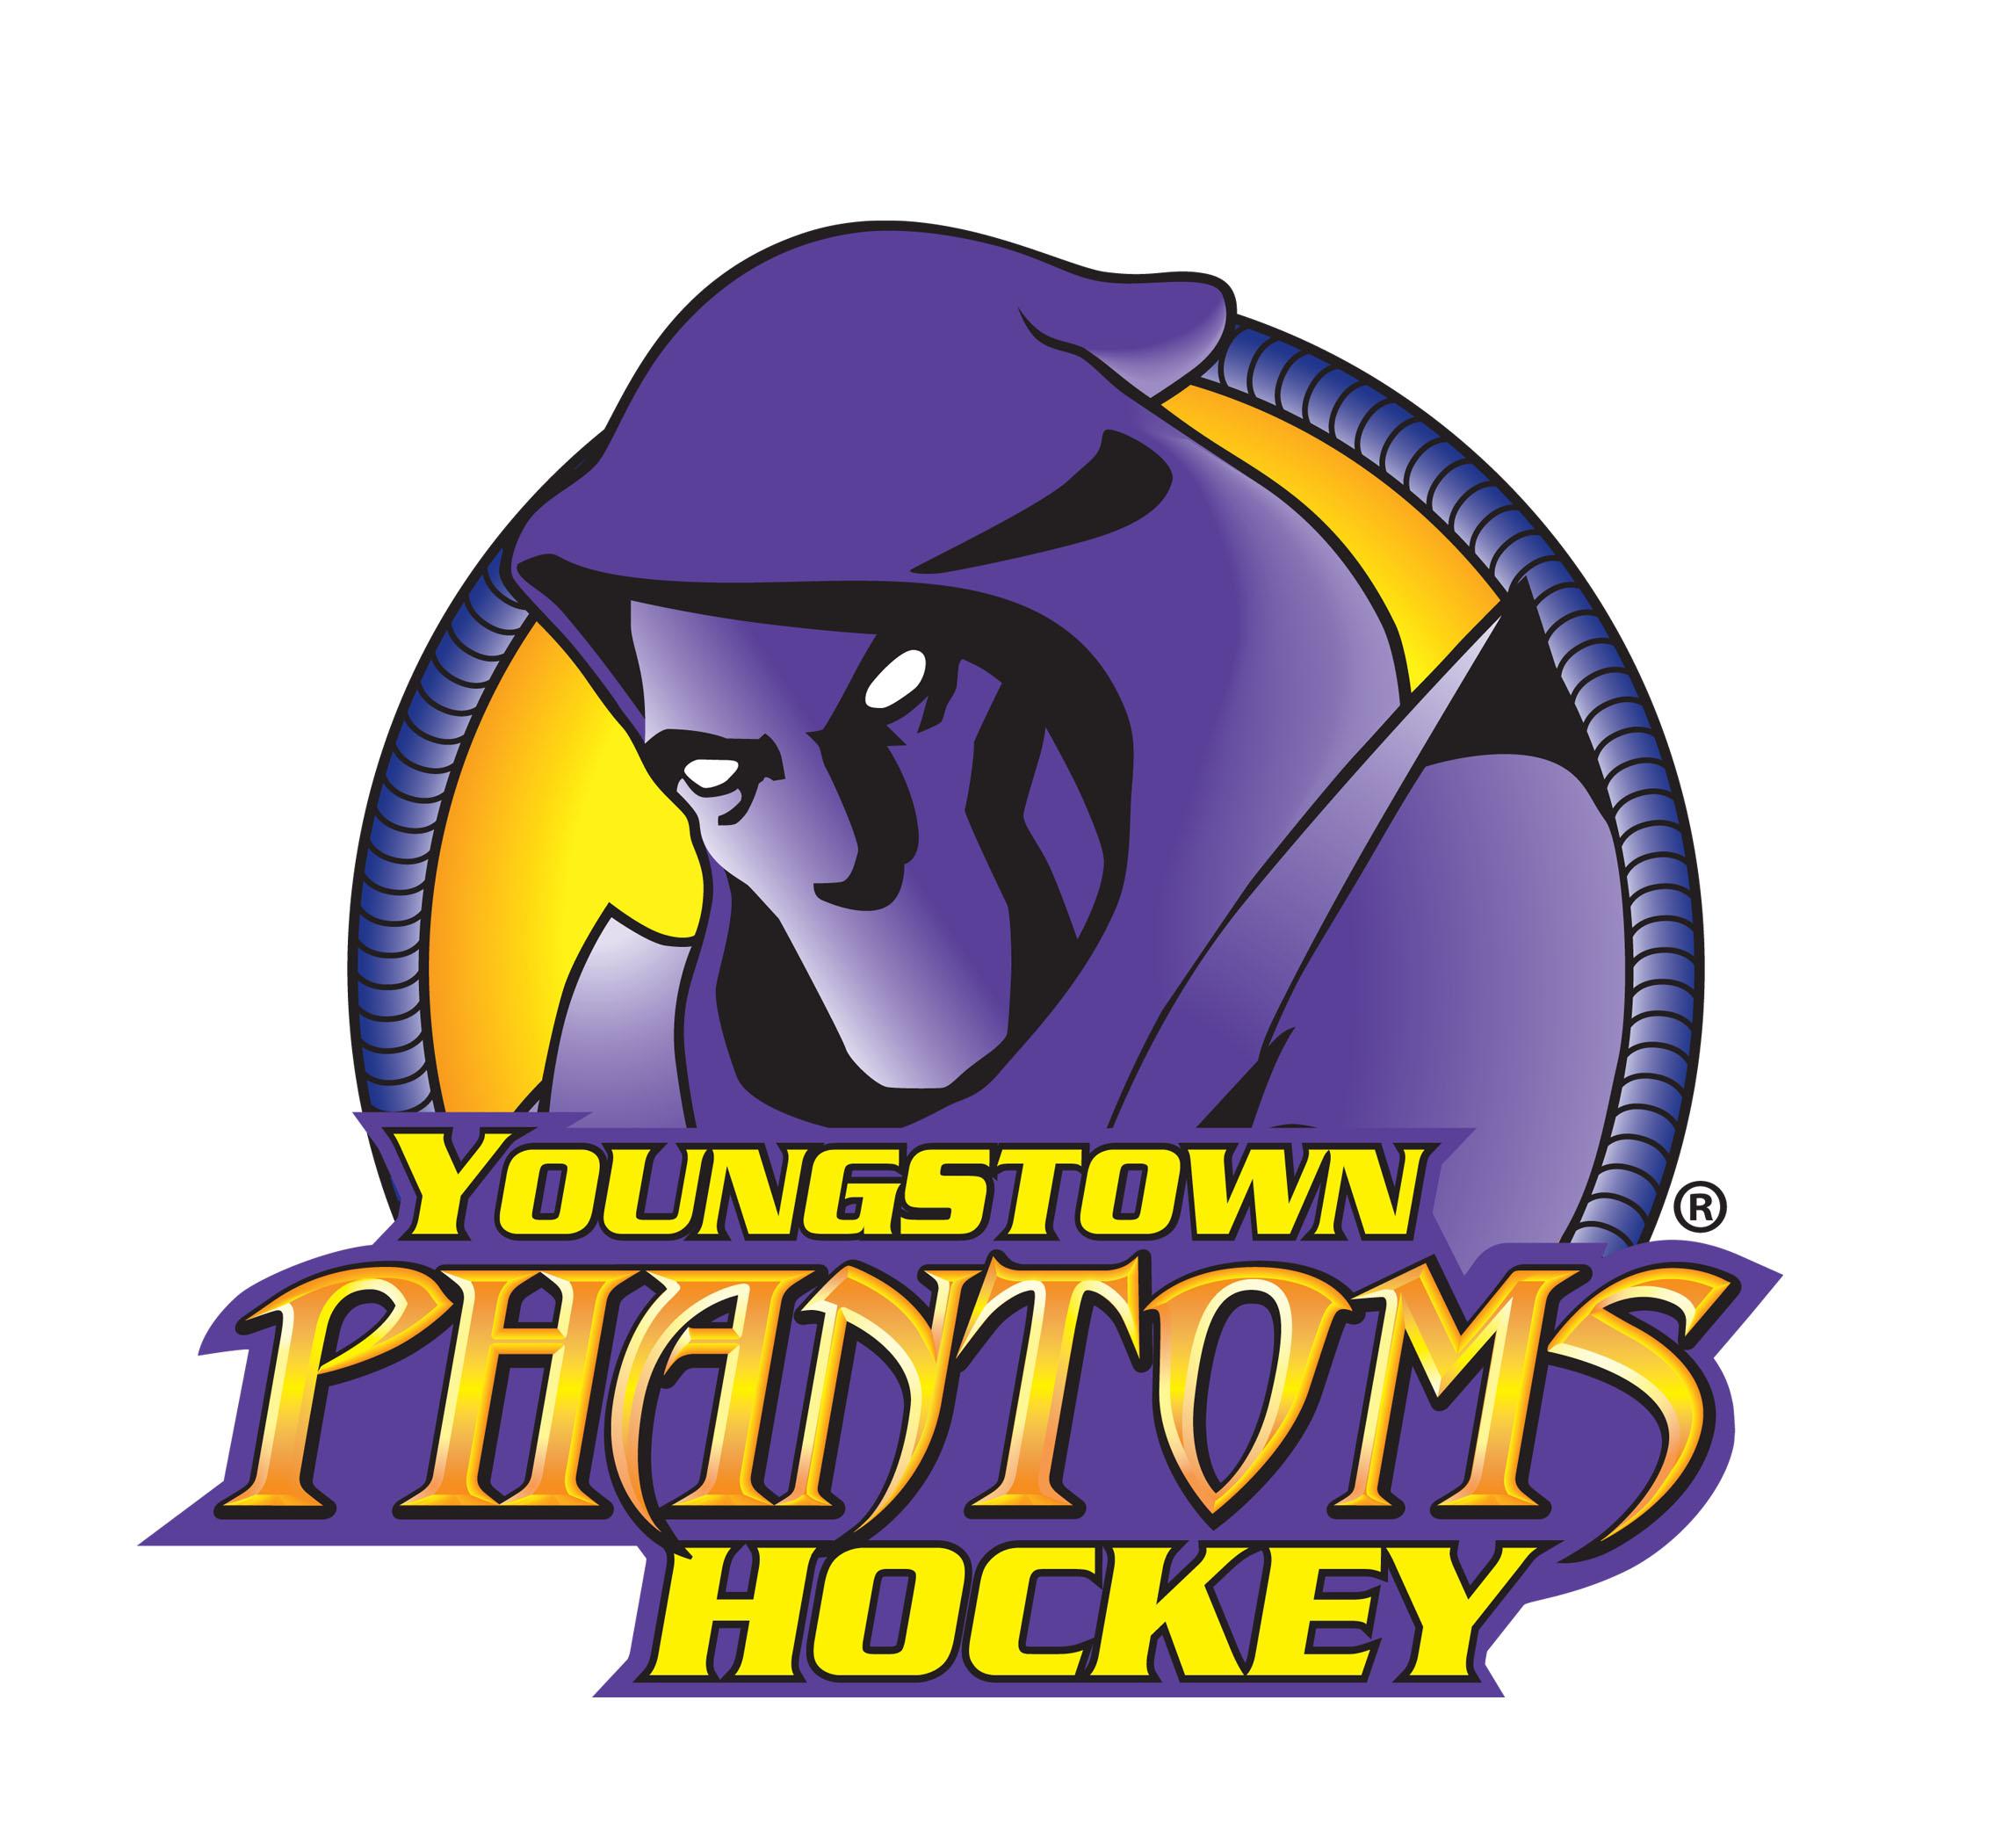 Loneys Sell Stake in Youngstown Phantoms - Business Journal Daily